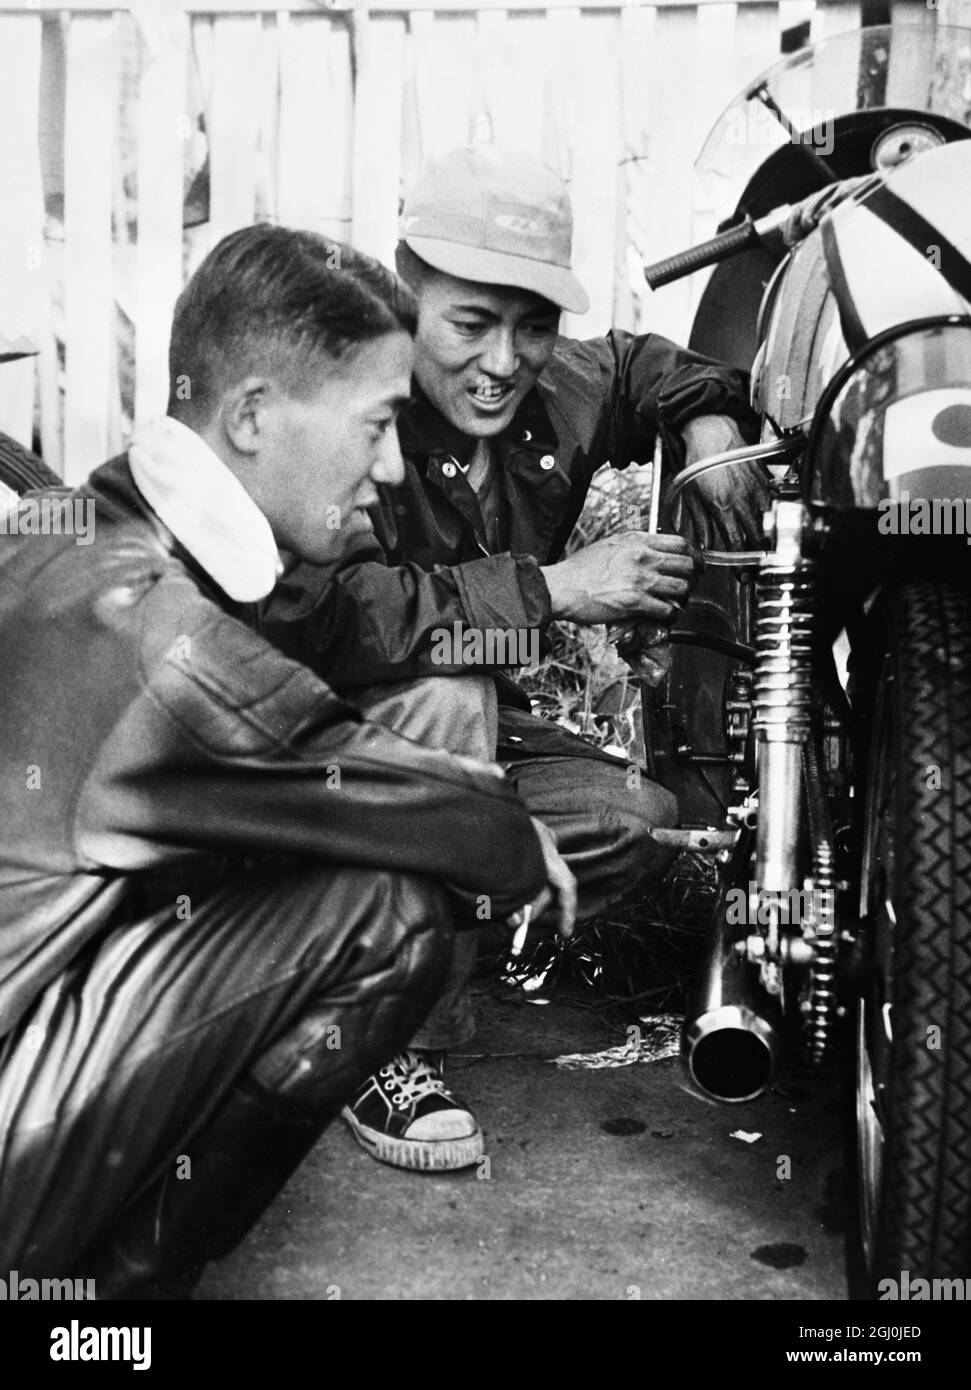 Isle of Man: N Taniguchi, one of the members of the Japanese motorbike team here for the TT races has a technical discussion with the chief mechanic. They are riding Honda machines in the races. 27th May 1959 Stock Photo